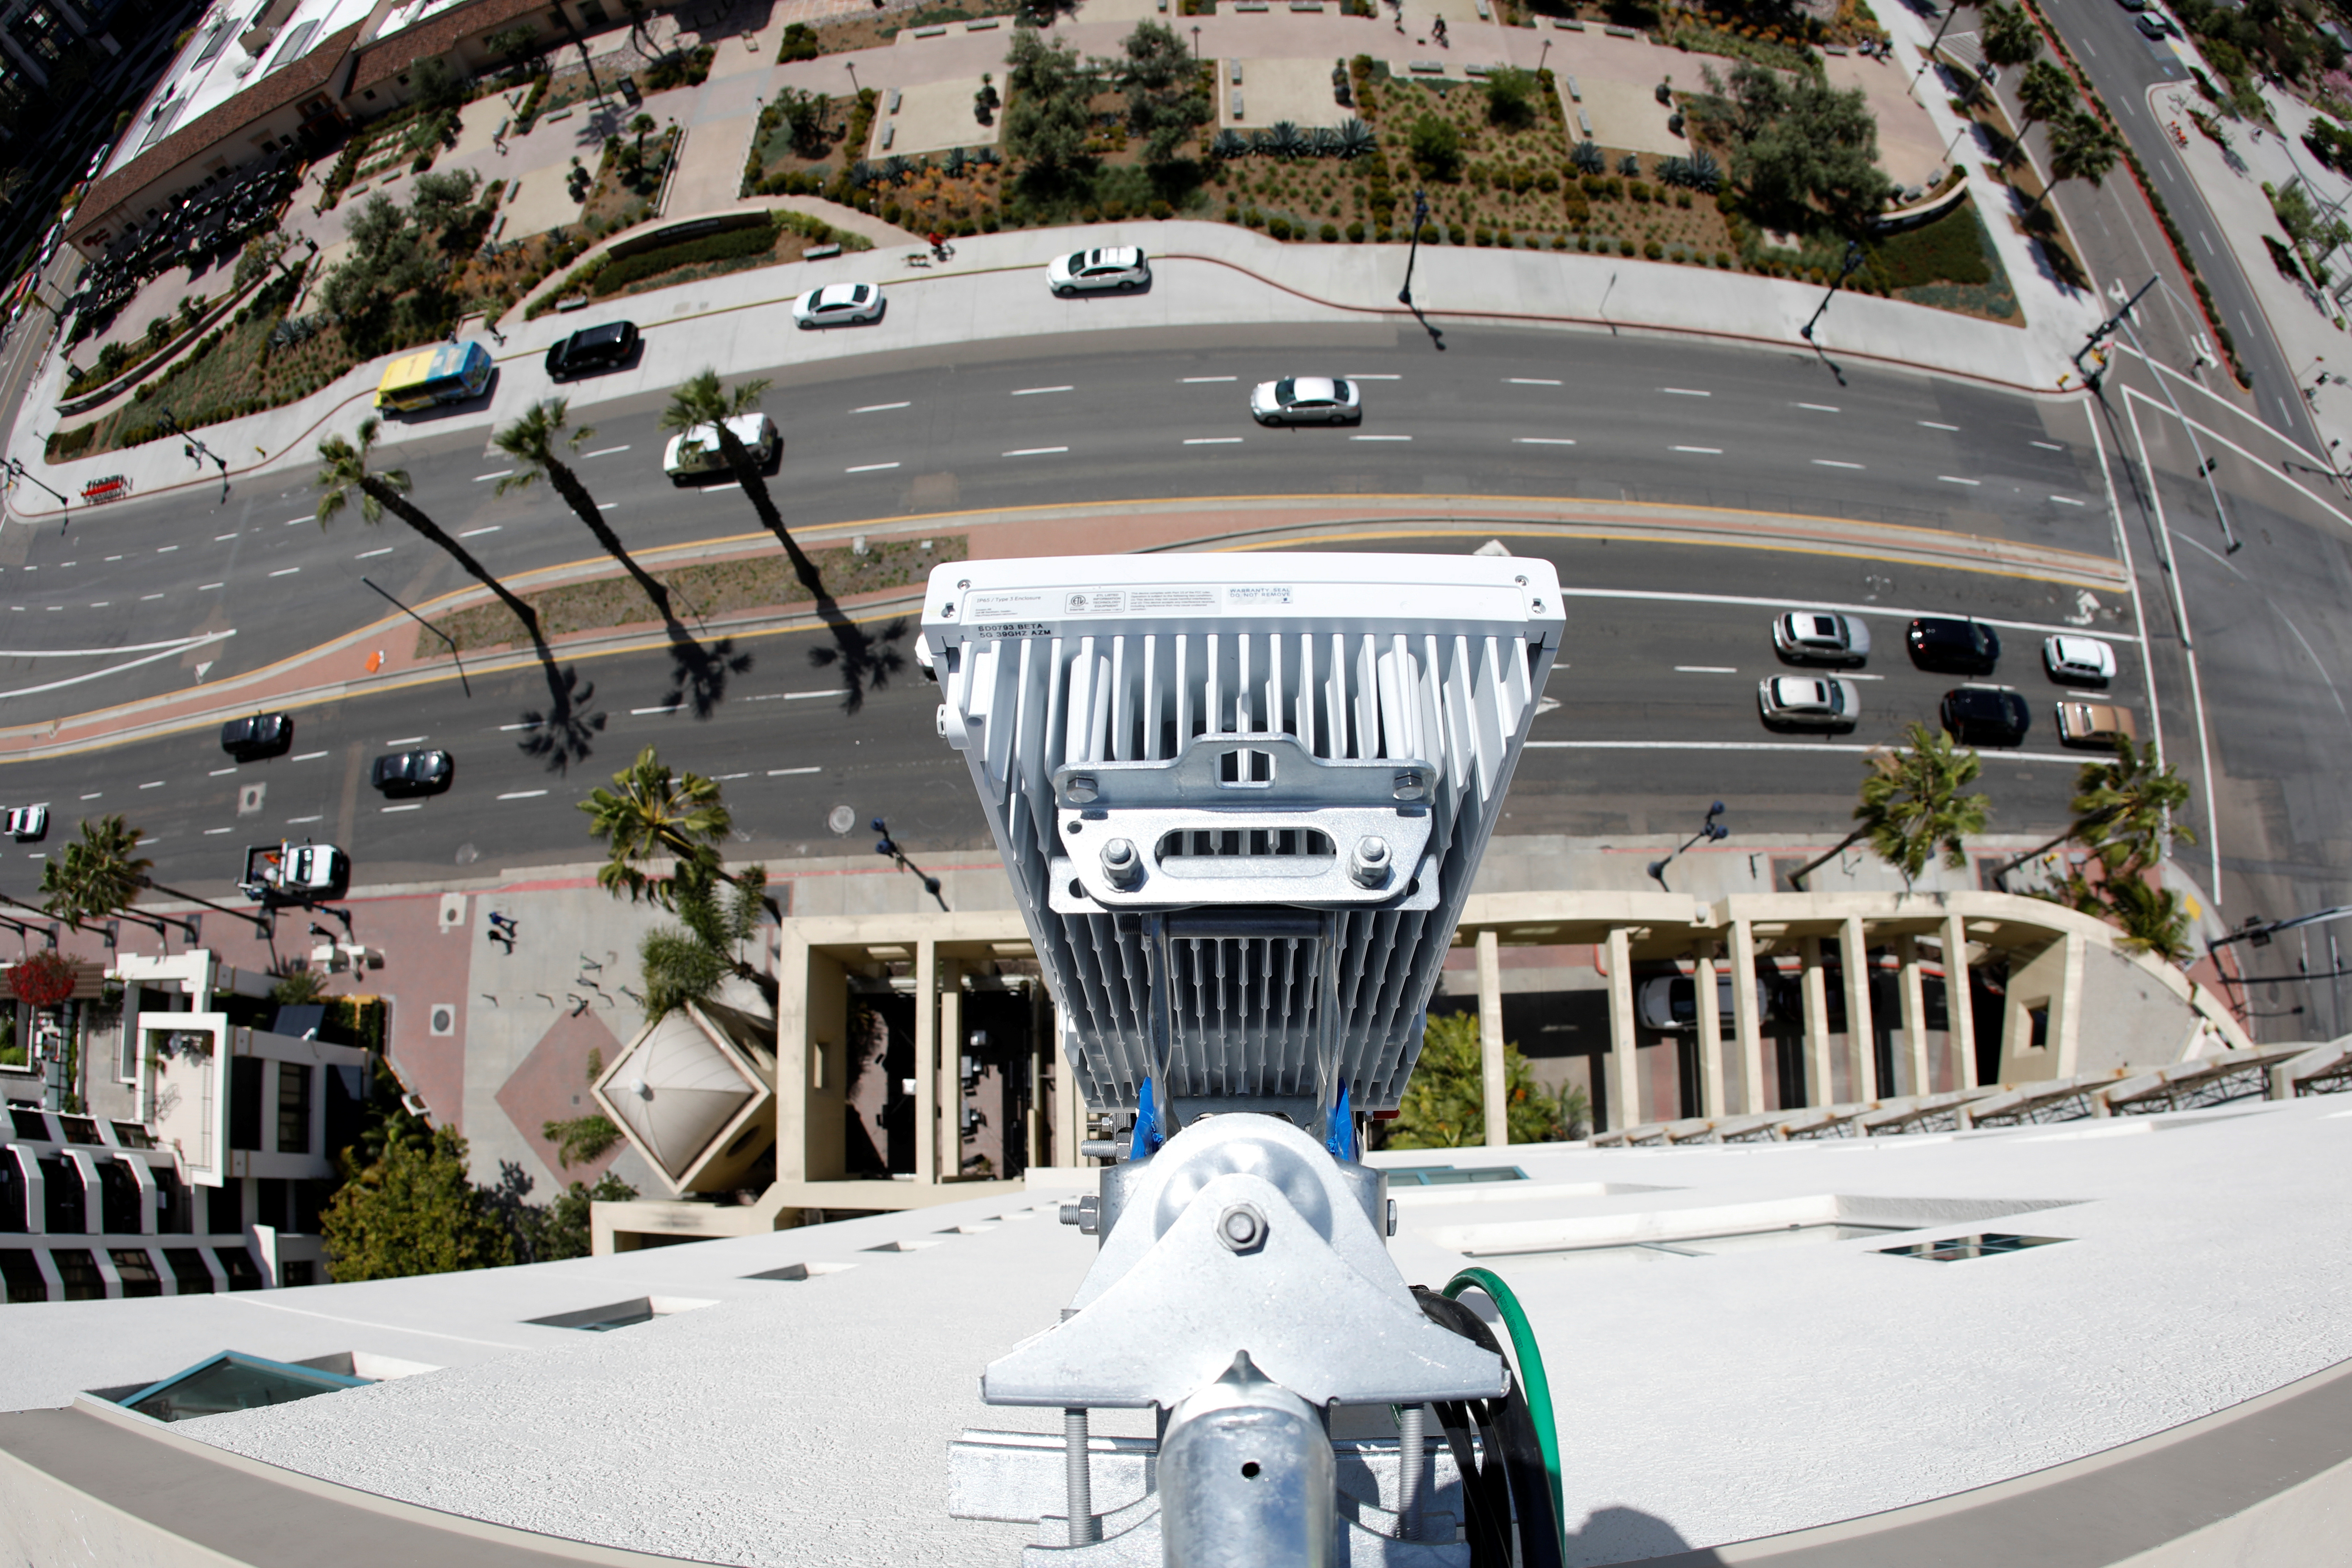 An antenna system for AT&T's 5G wireless network is shown atop a building in downtown San Diego